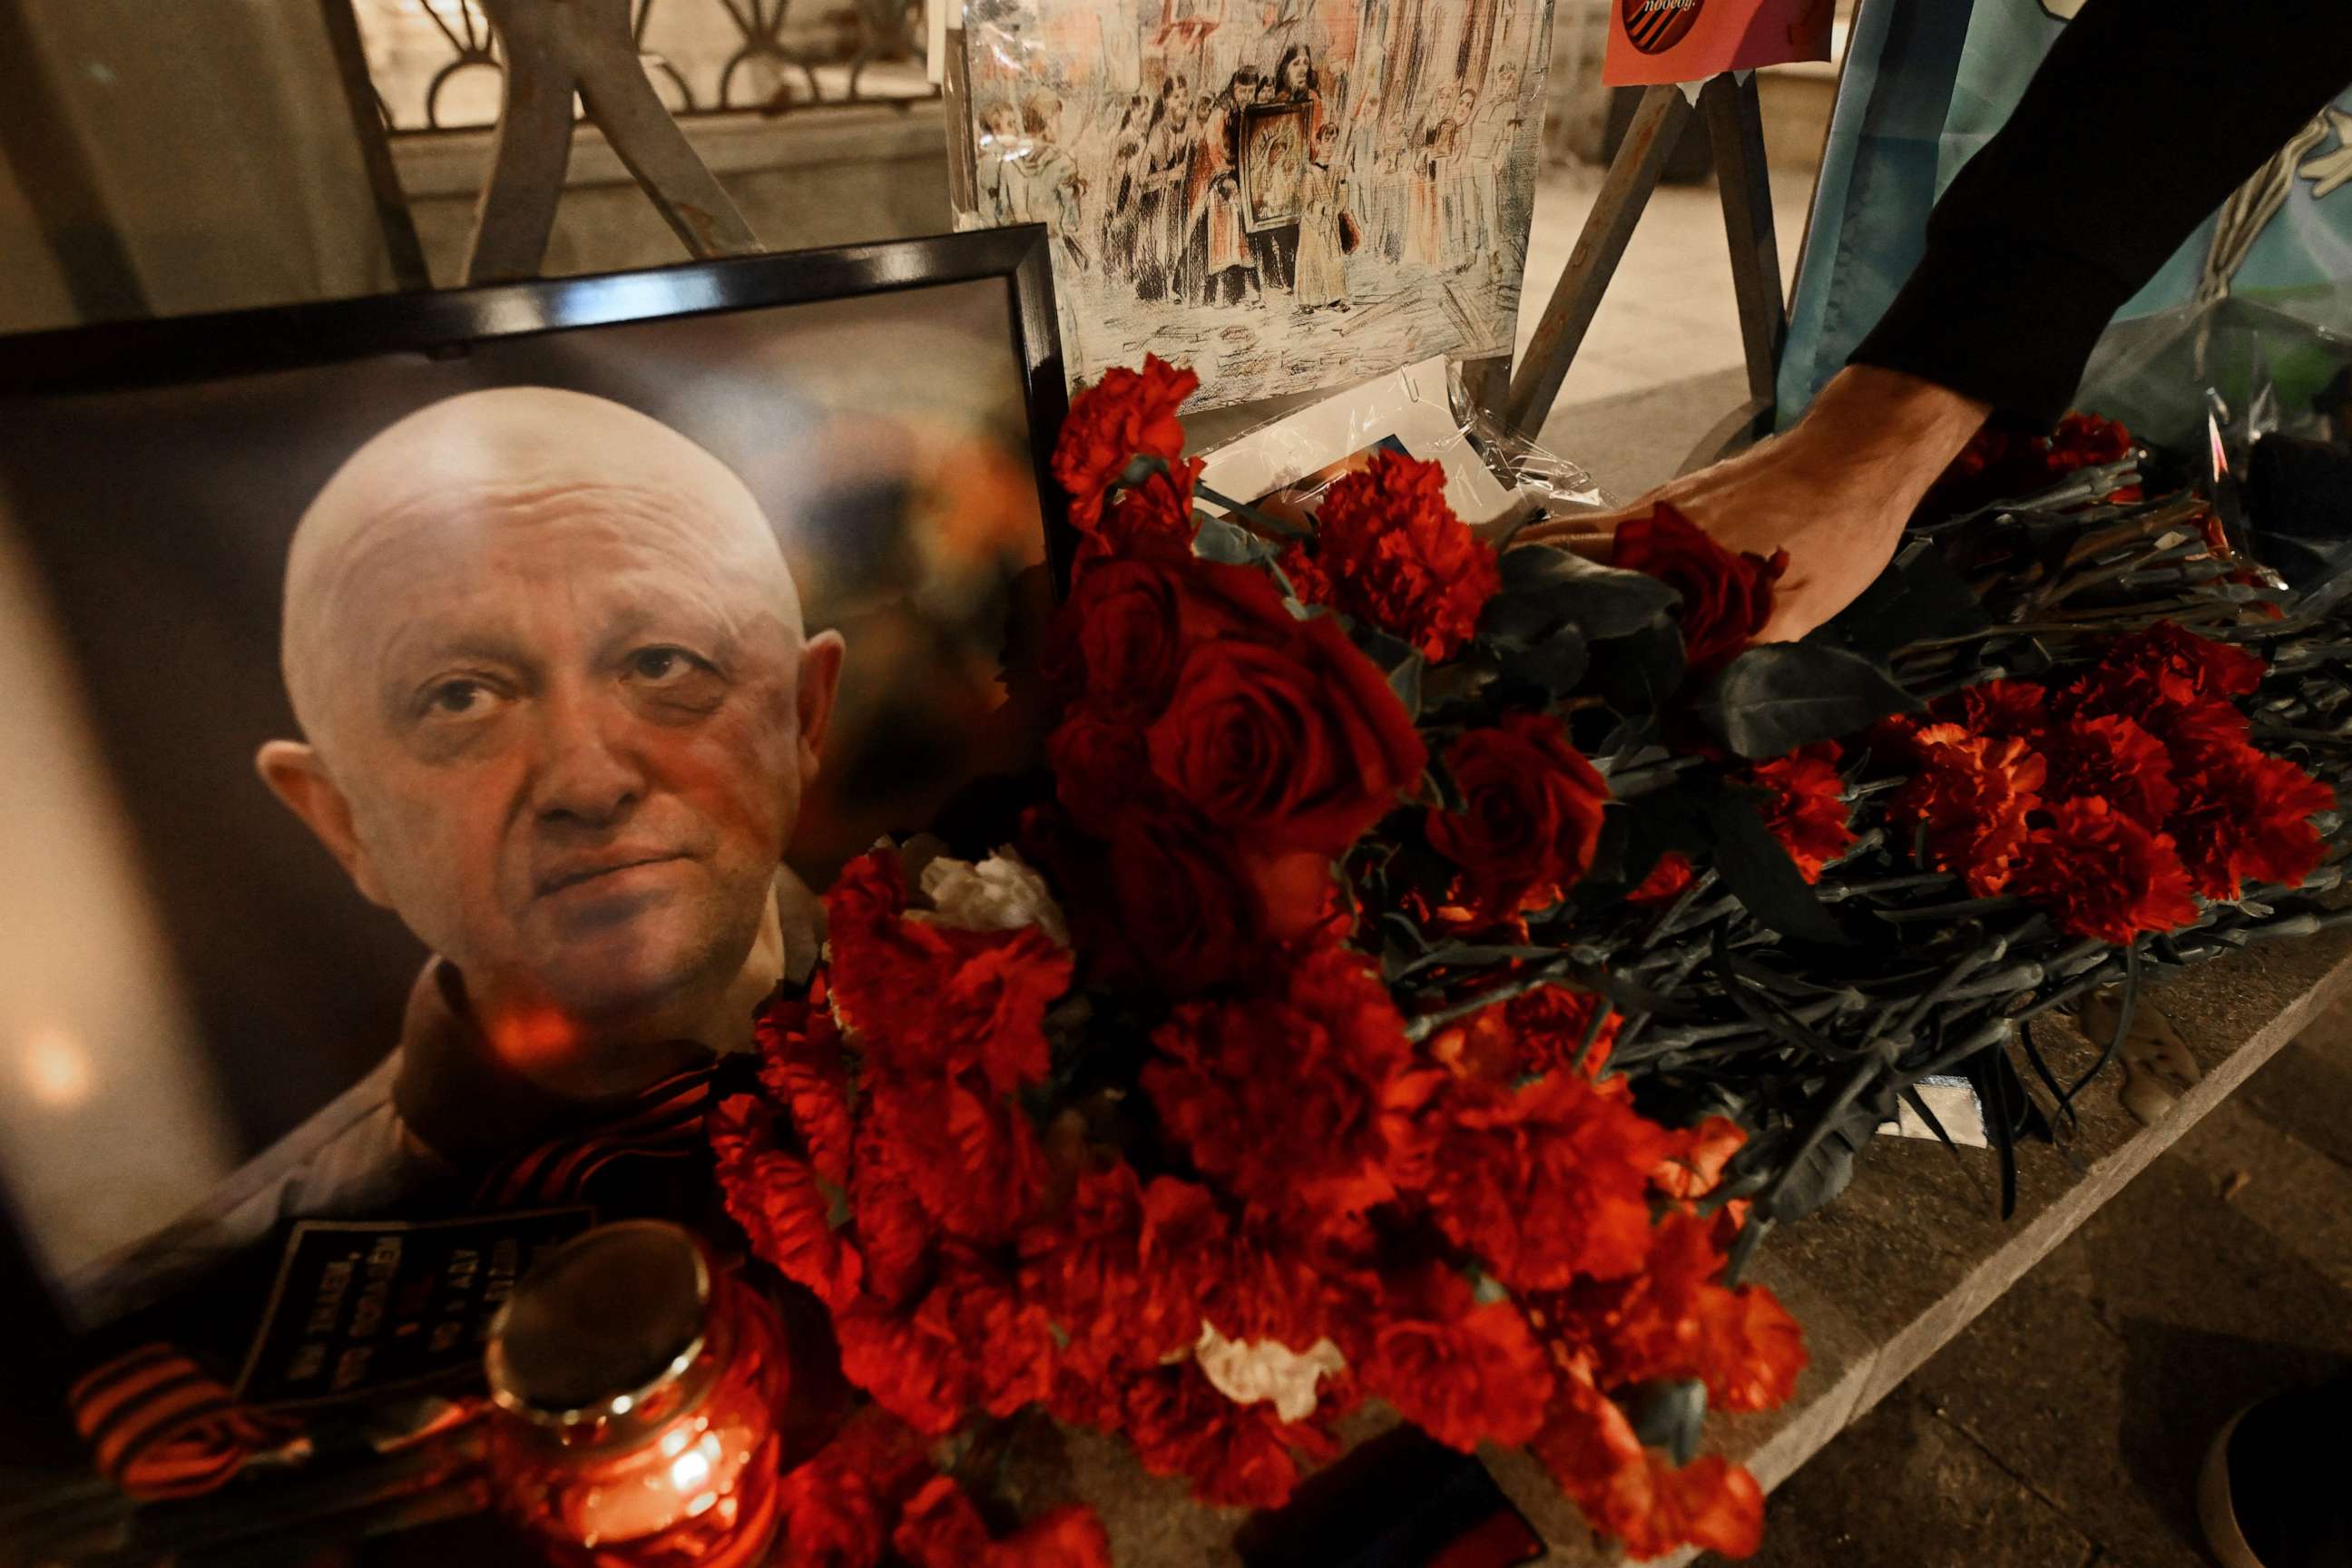 PHOTO: A man lays flowers at the makeshift memorial in honor of Yevgeny Prigozhin and Dmitry Utkin, a shadowy figure who managed Wagner's operations and allegedly served in Russian military intelligence, in Moscow, on August 24, 2023.